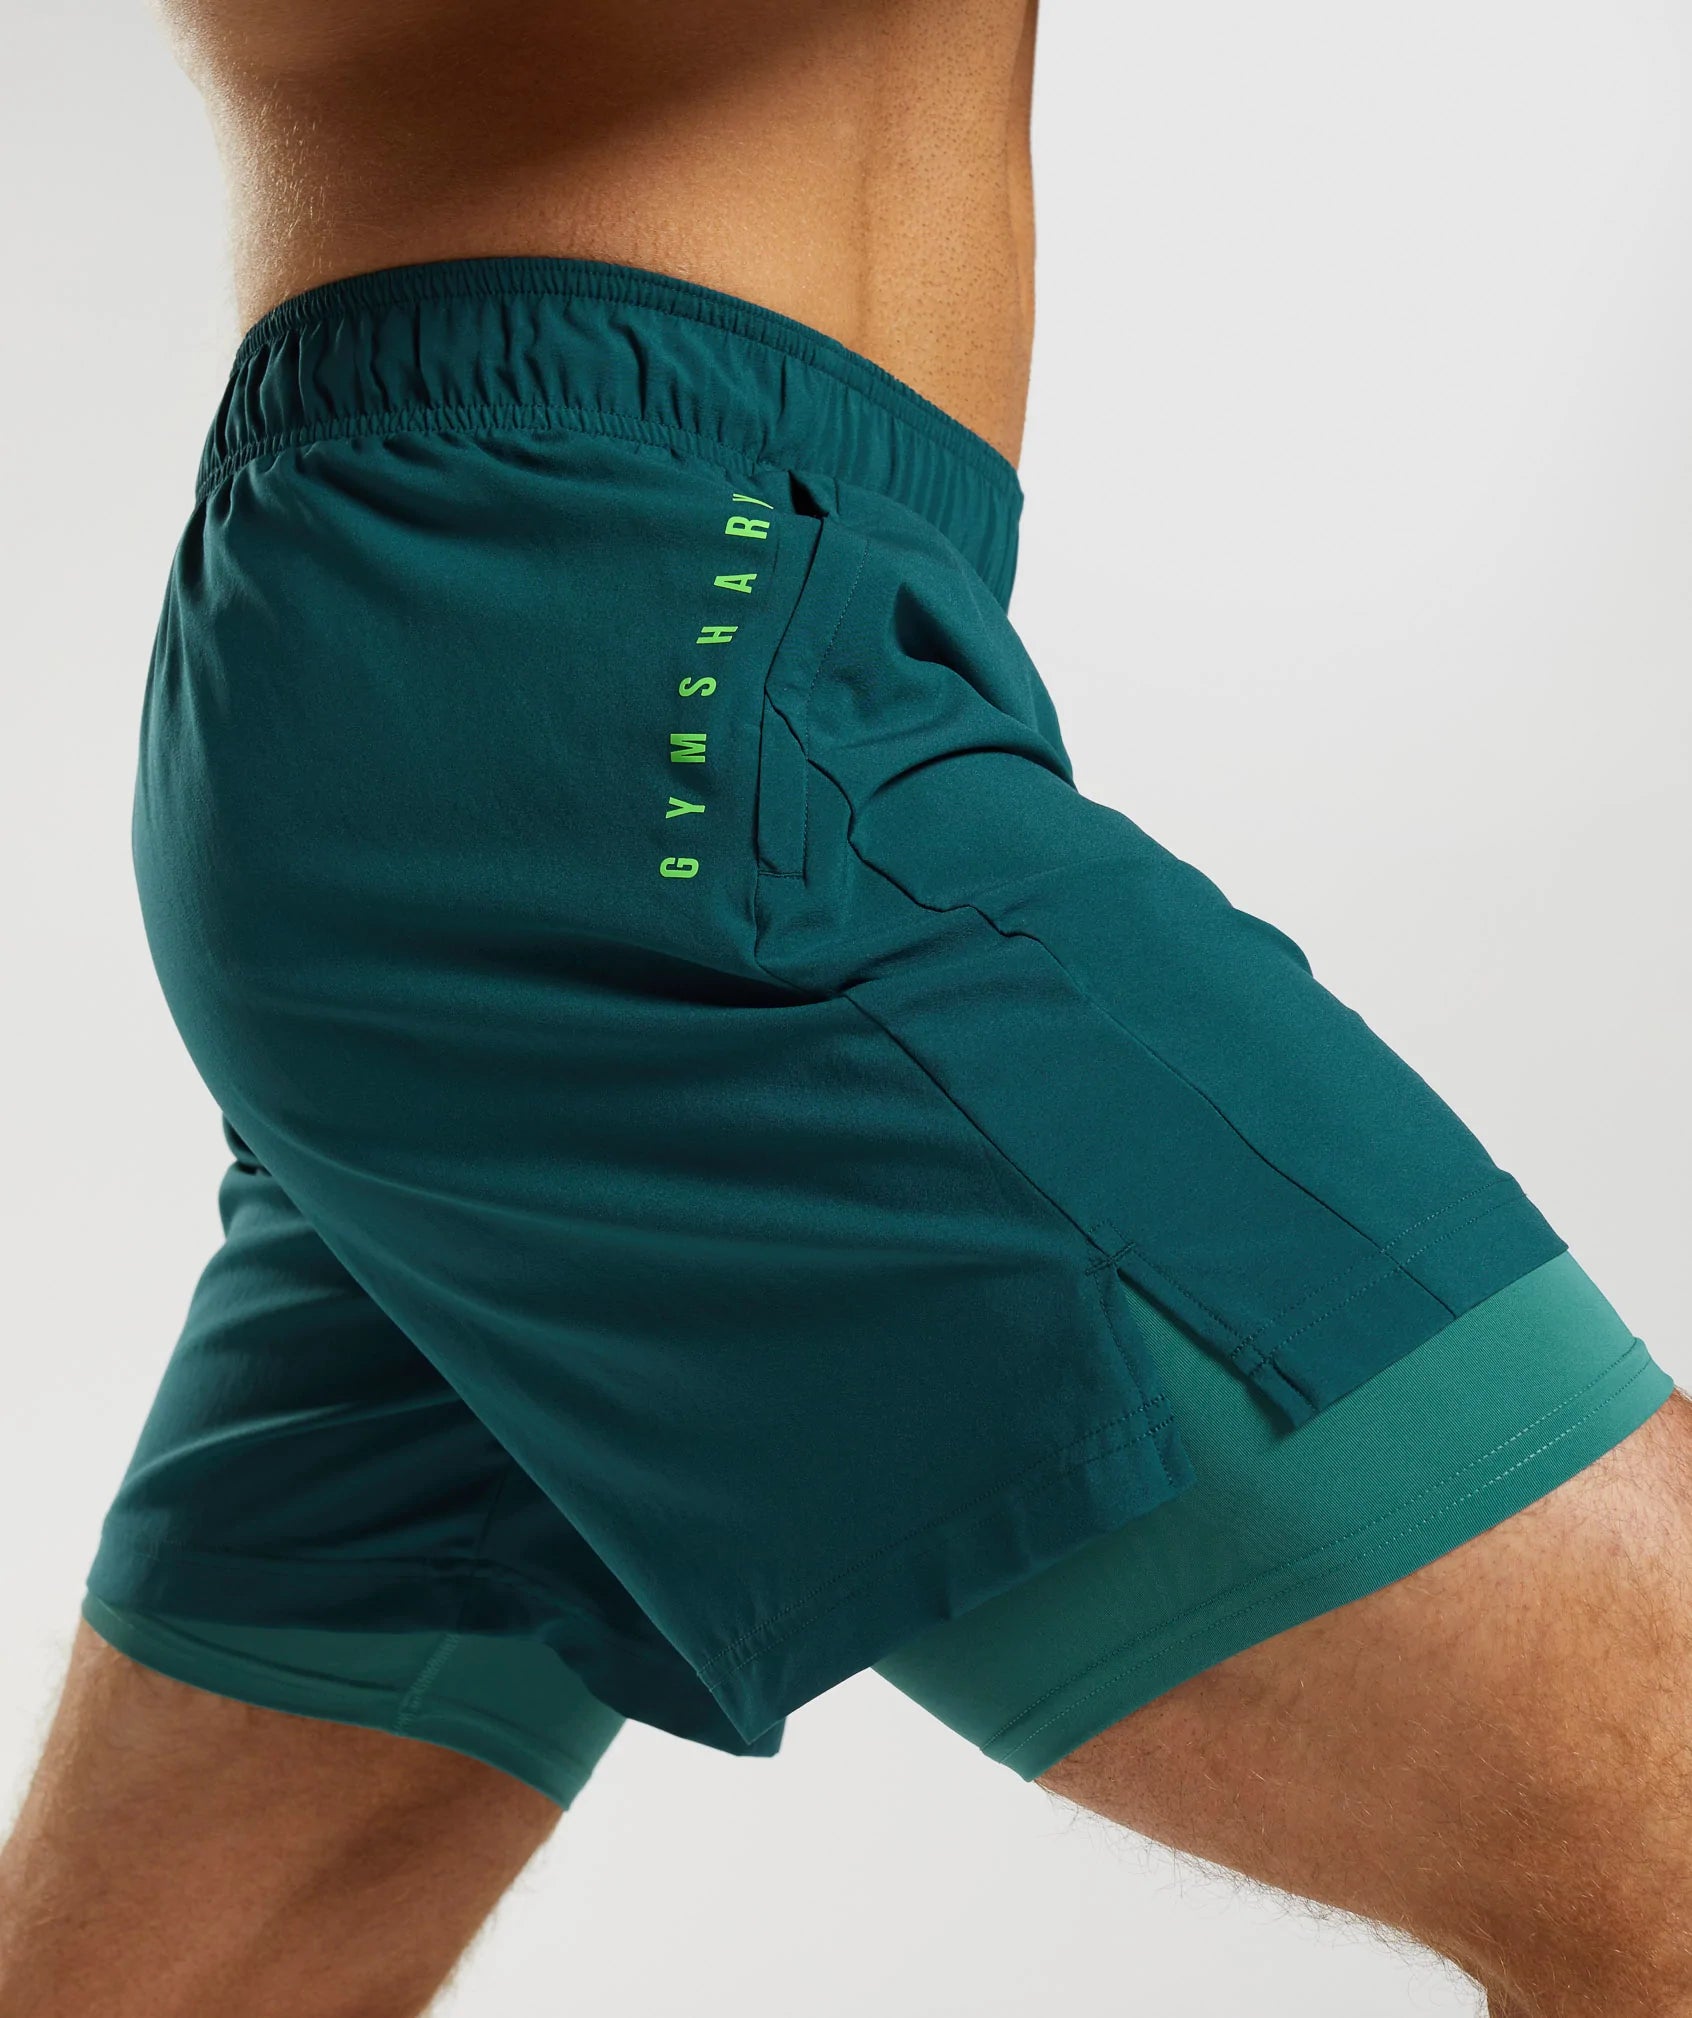 Sport 7" 2 In 1 Shorts in Winter Teal/Slate Blue - view 6